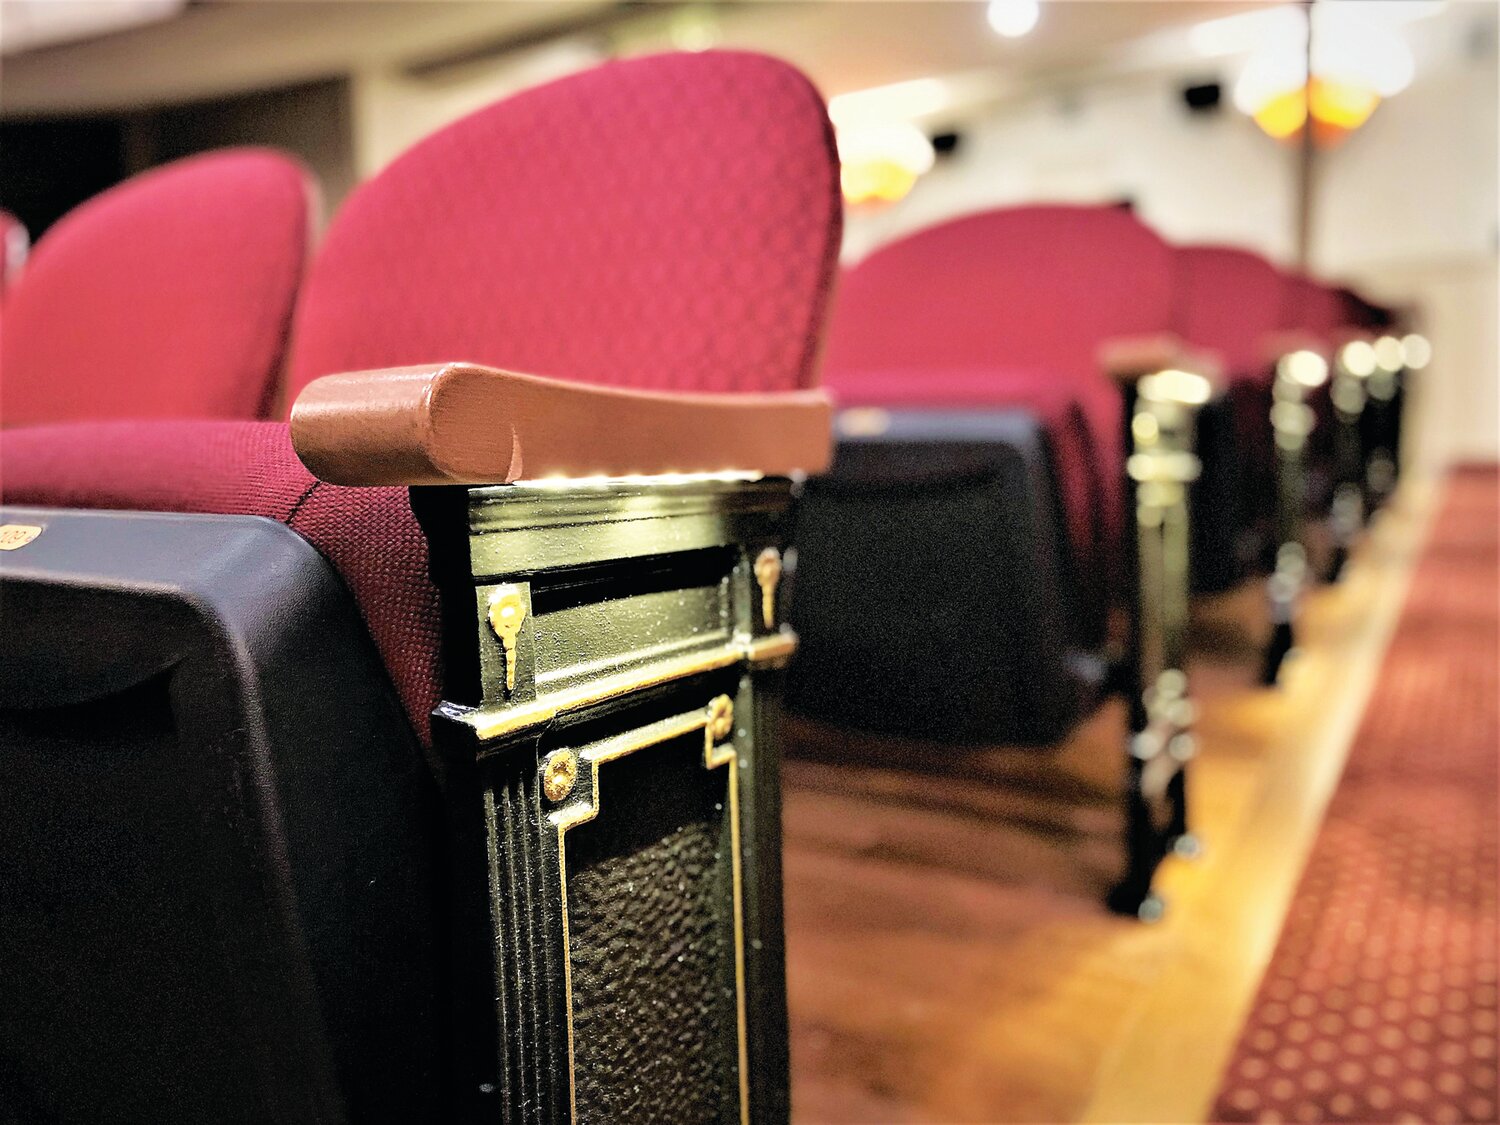 The historic Newtown Theatre has launched the “Balcony Edition” of its Adopt-a-Seat Program to help fund its next phase of renovations.